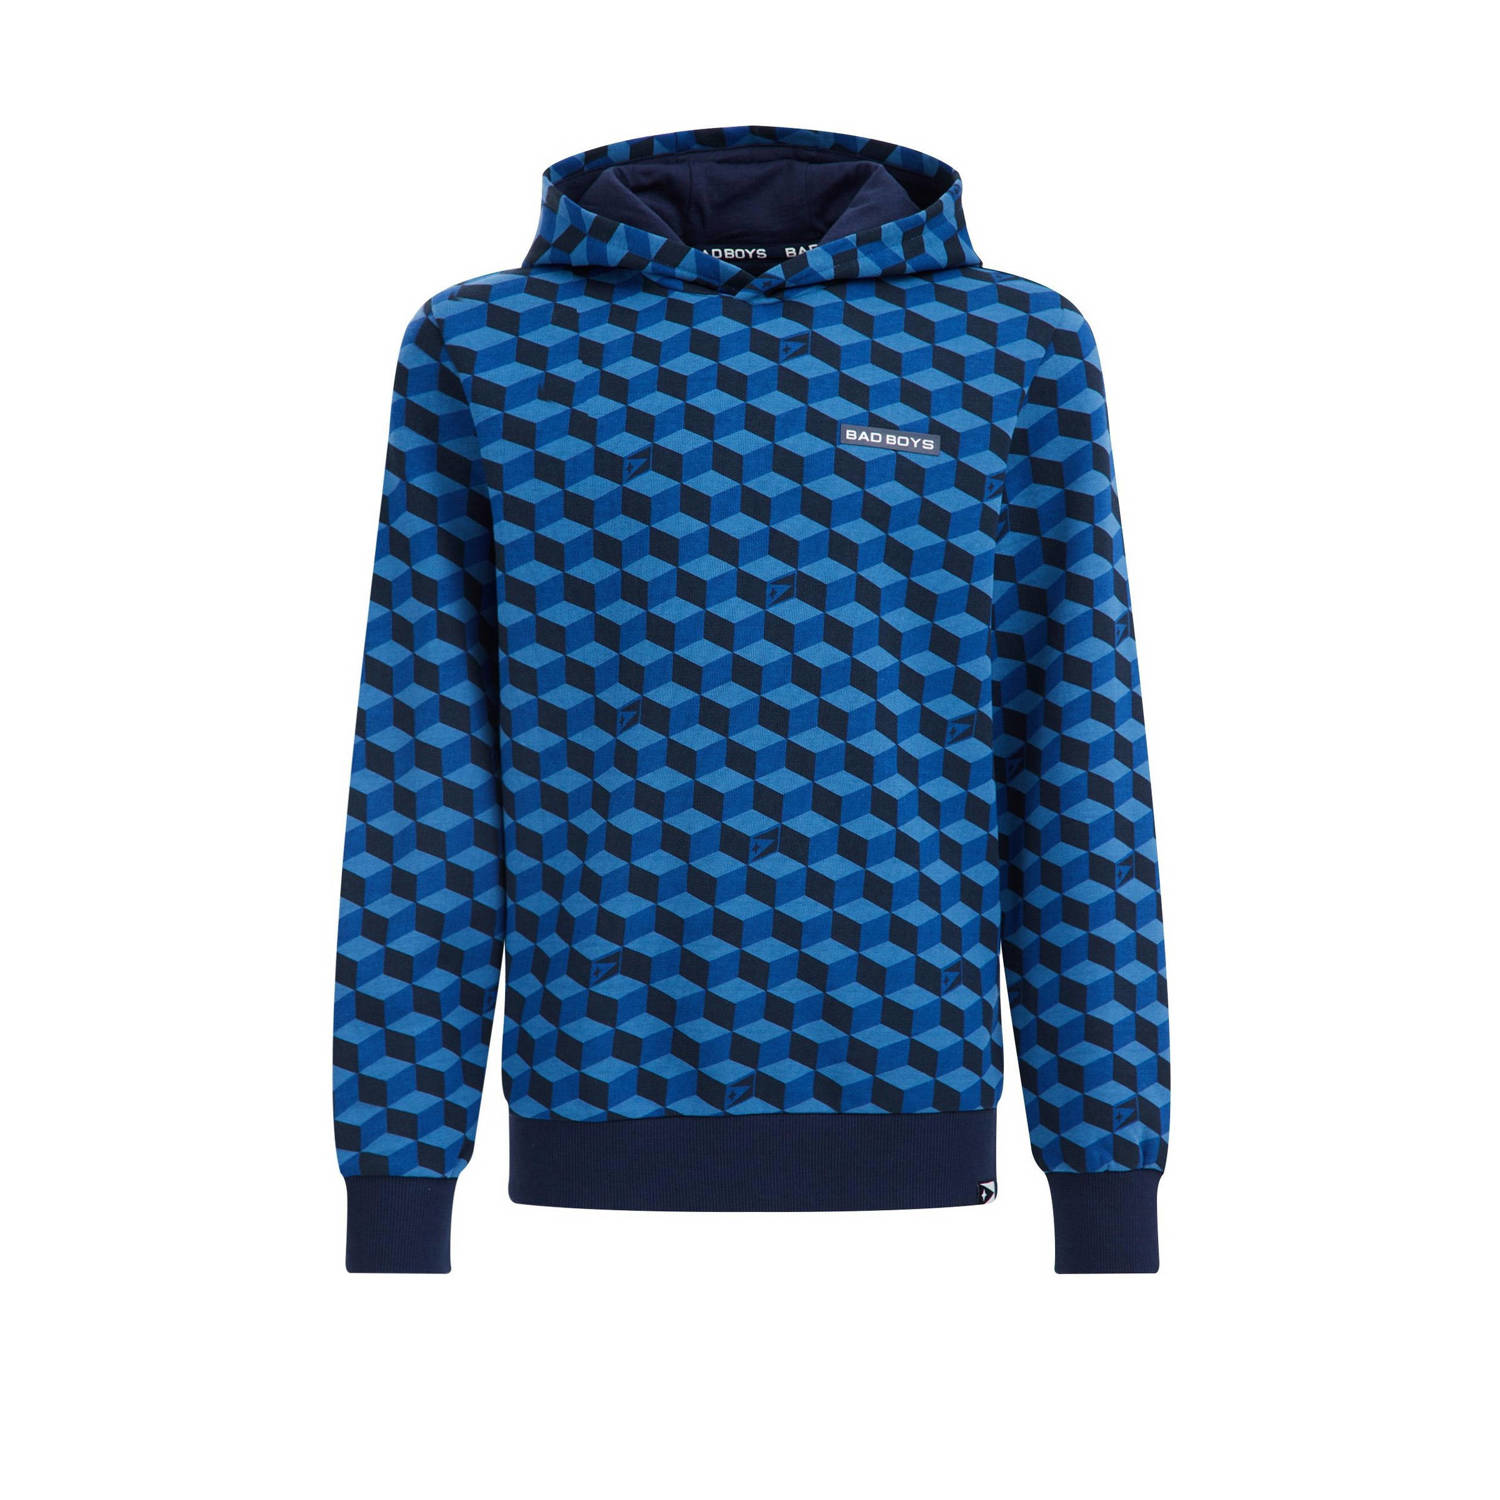 WE Fashion sweater met all over print blauw All over print 110 116